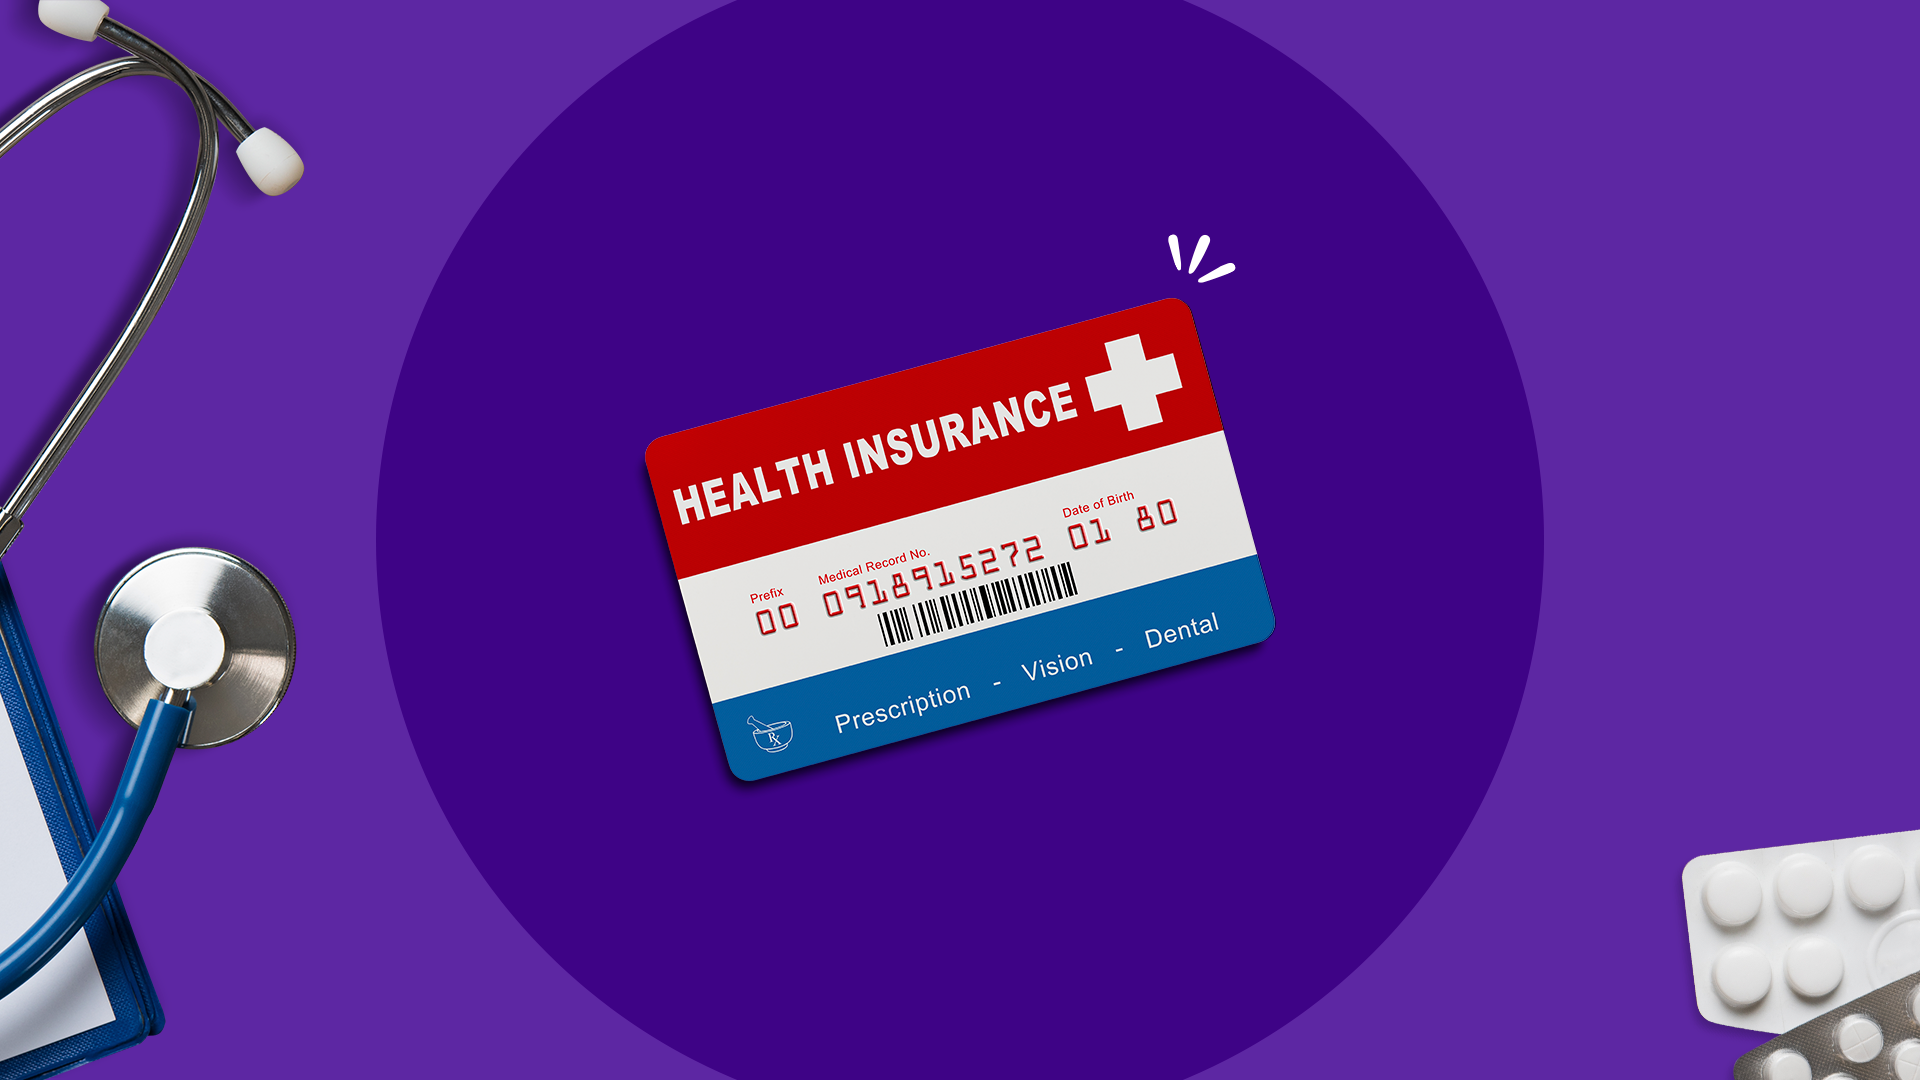 How to get health insurance in 2020